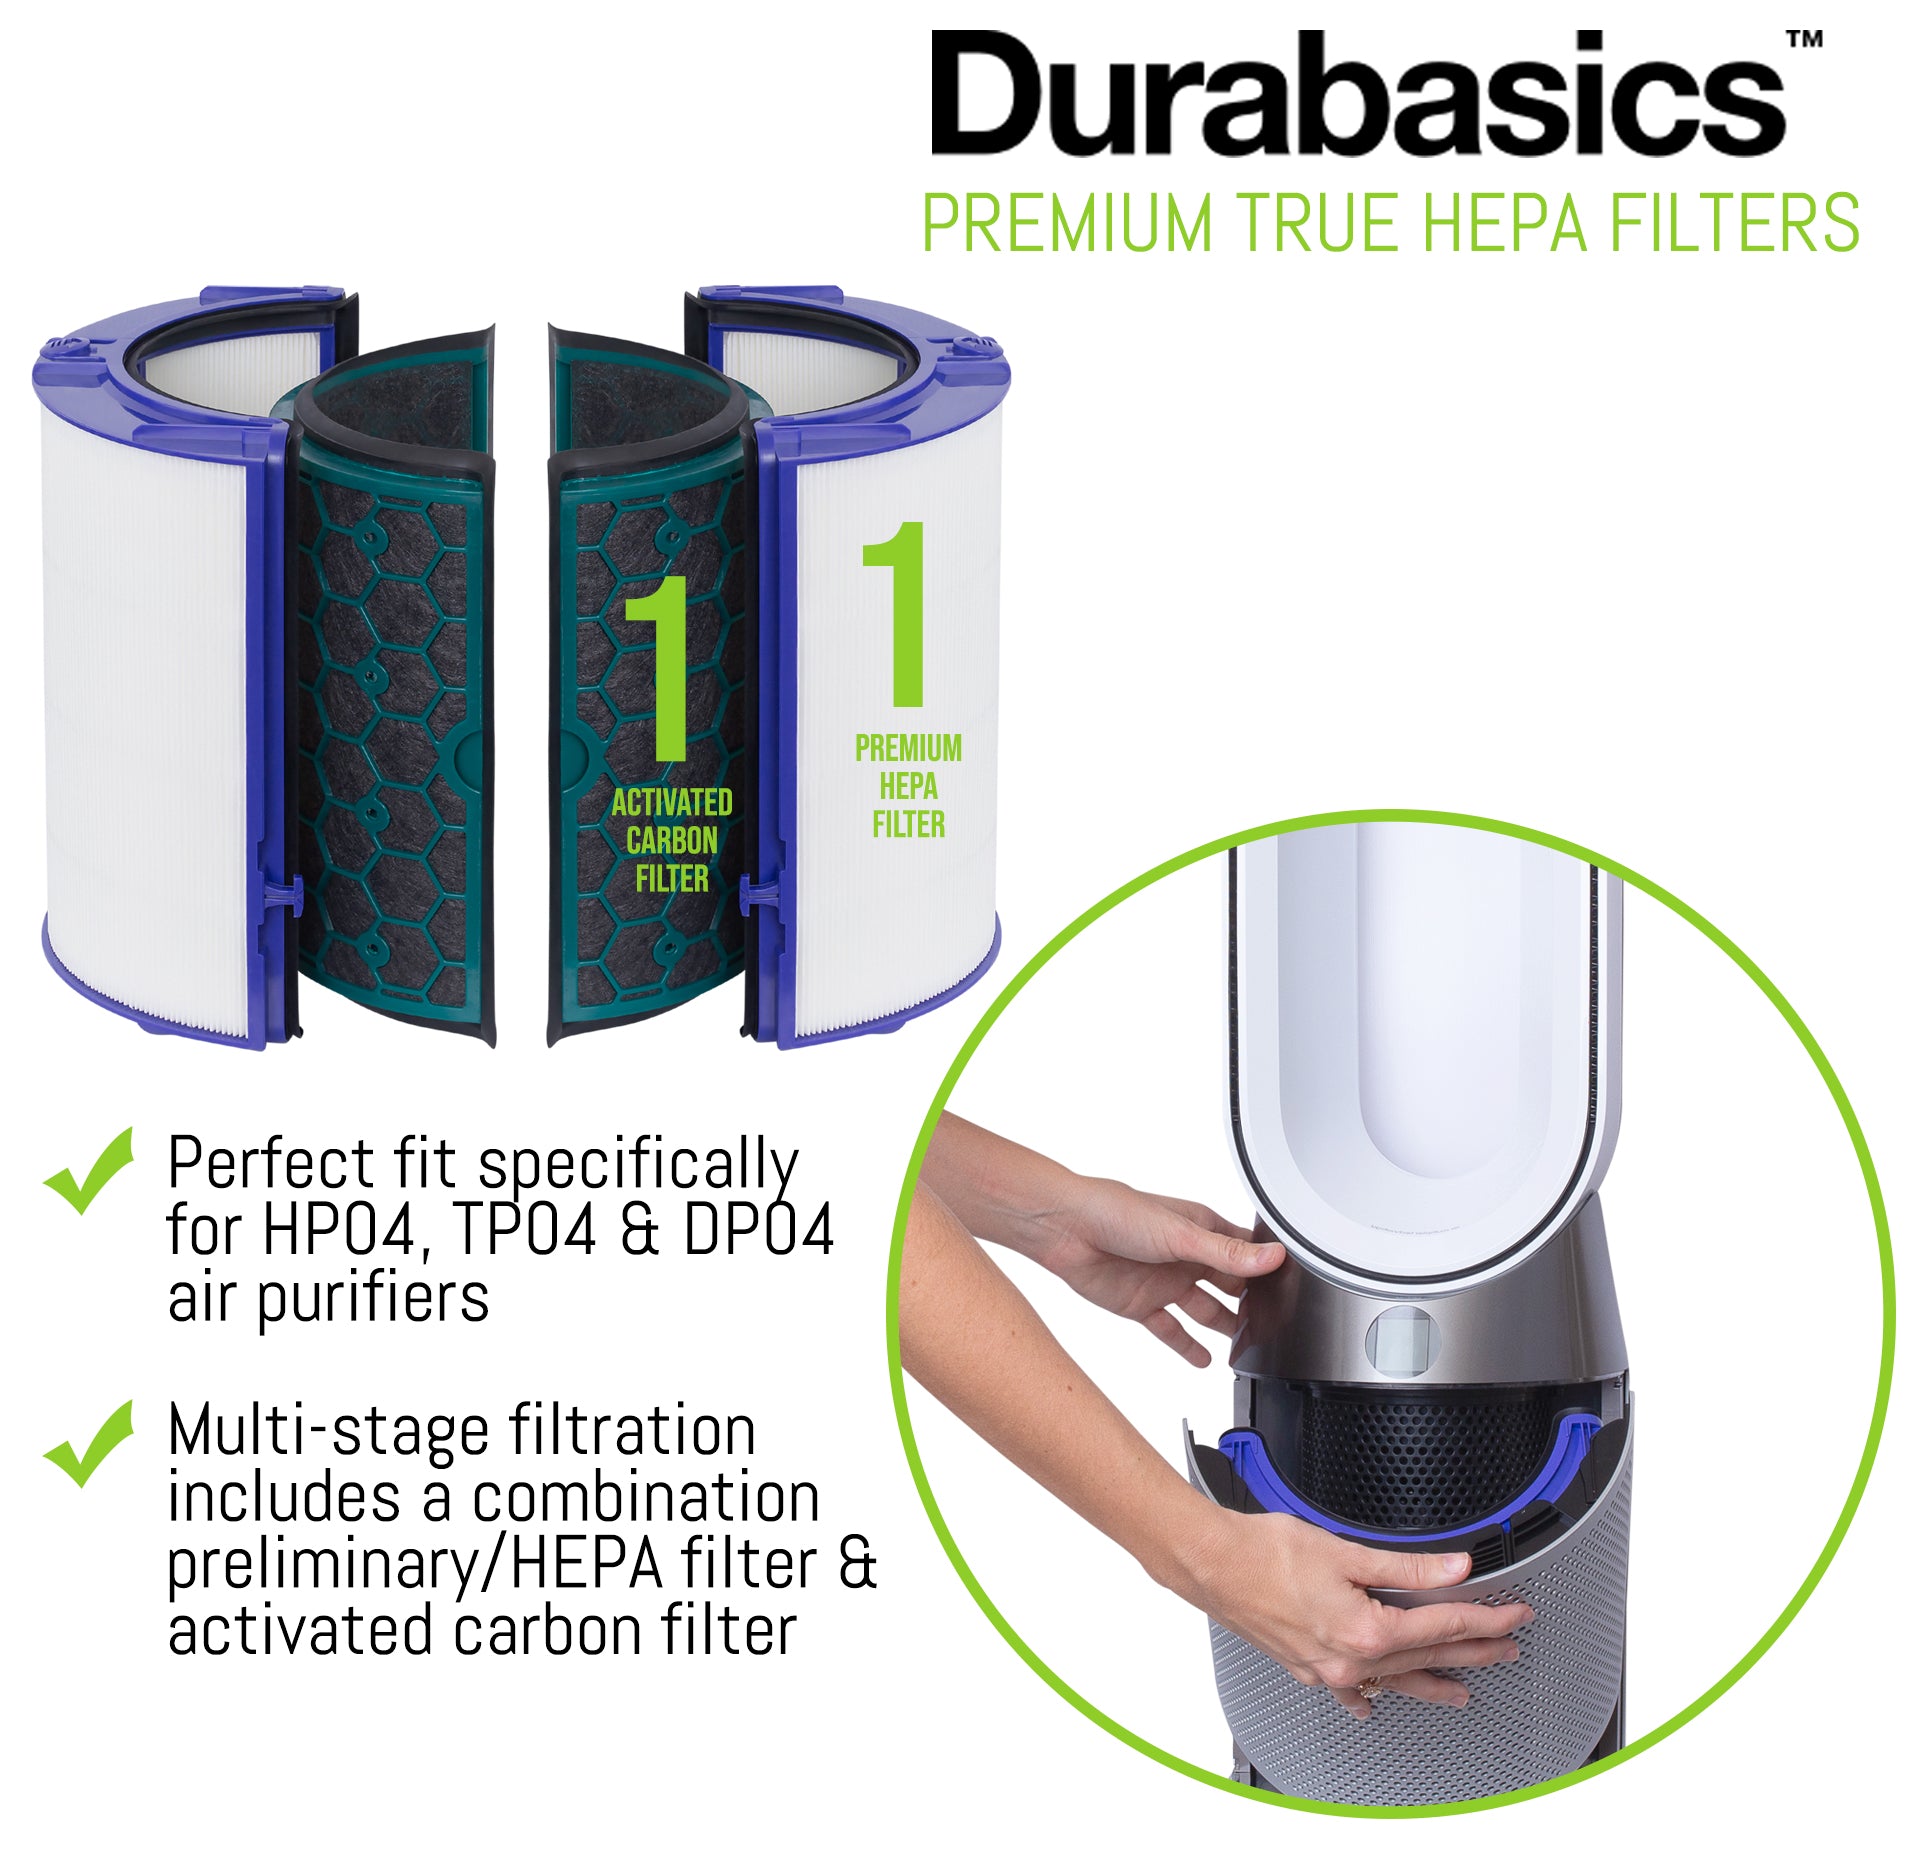 Dyson TP04, & Filter Replacements for Pure - Durabasics